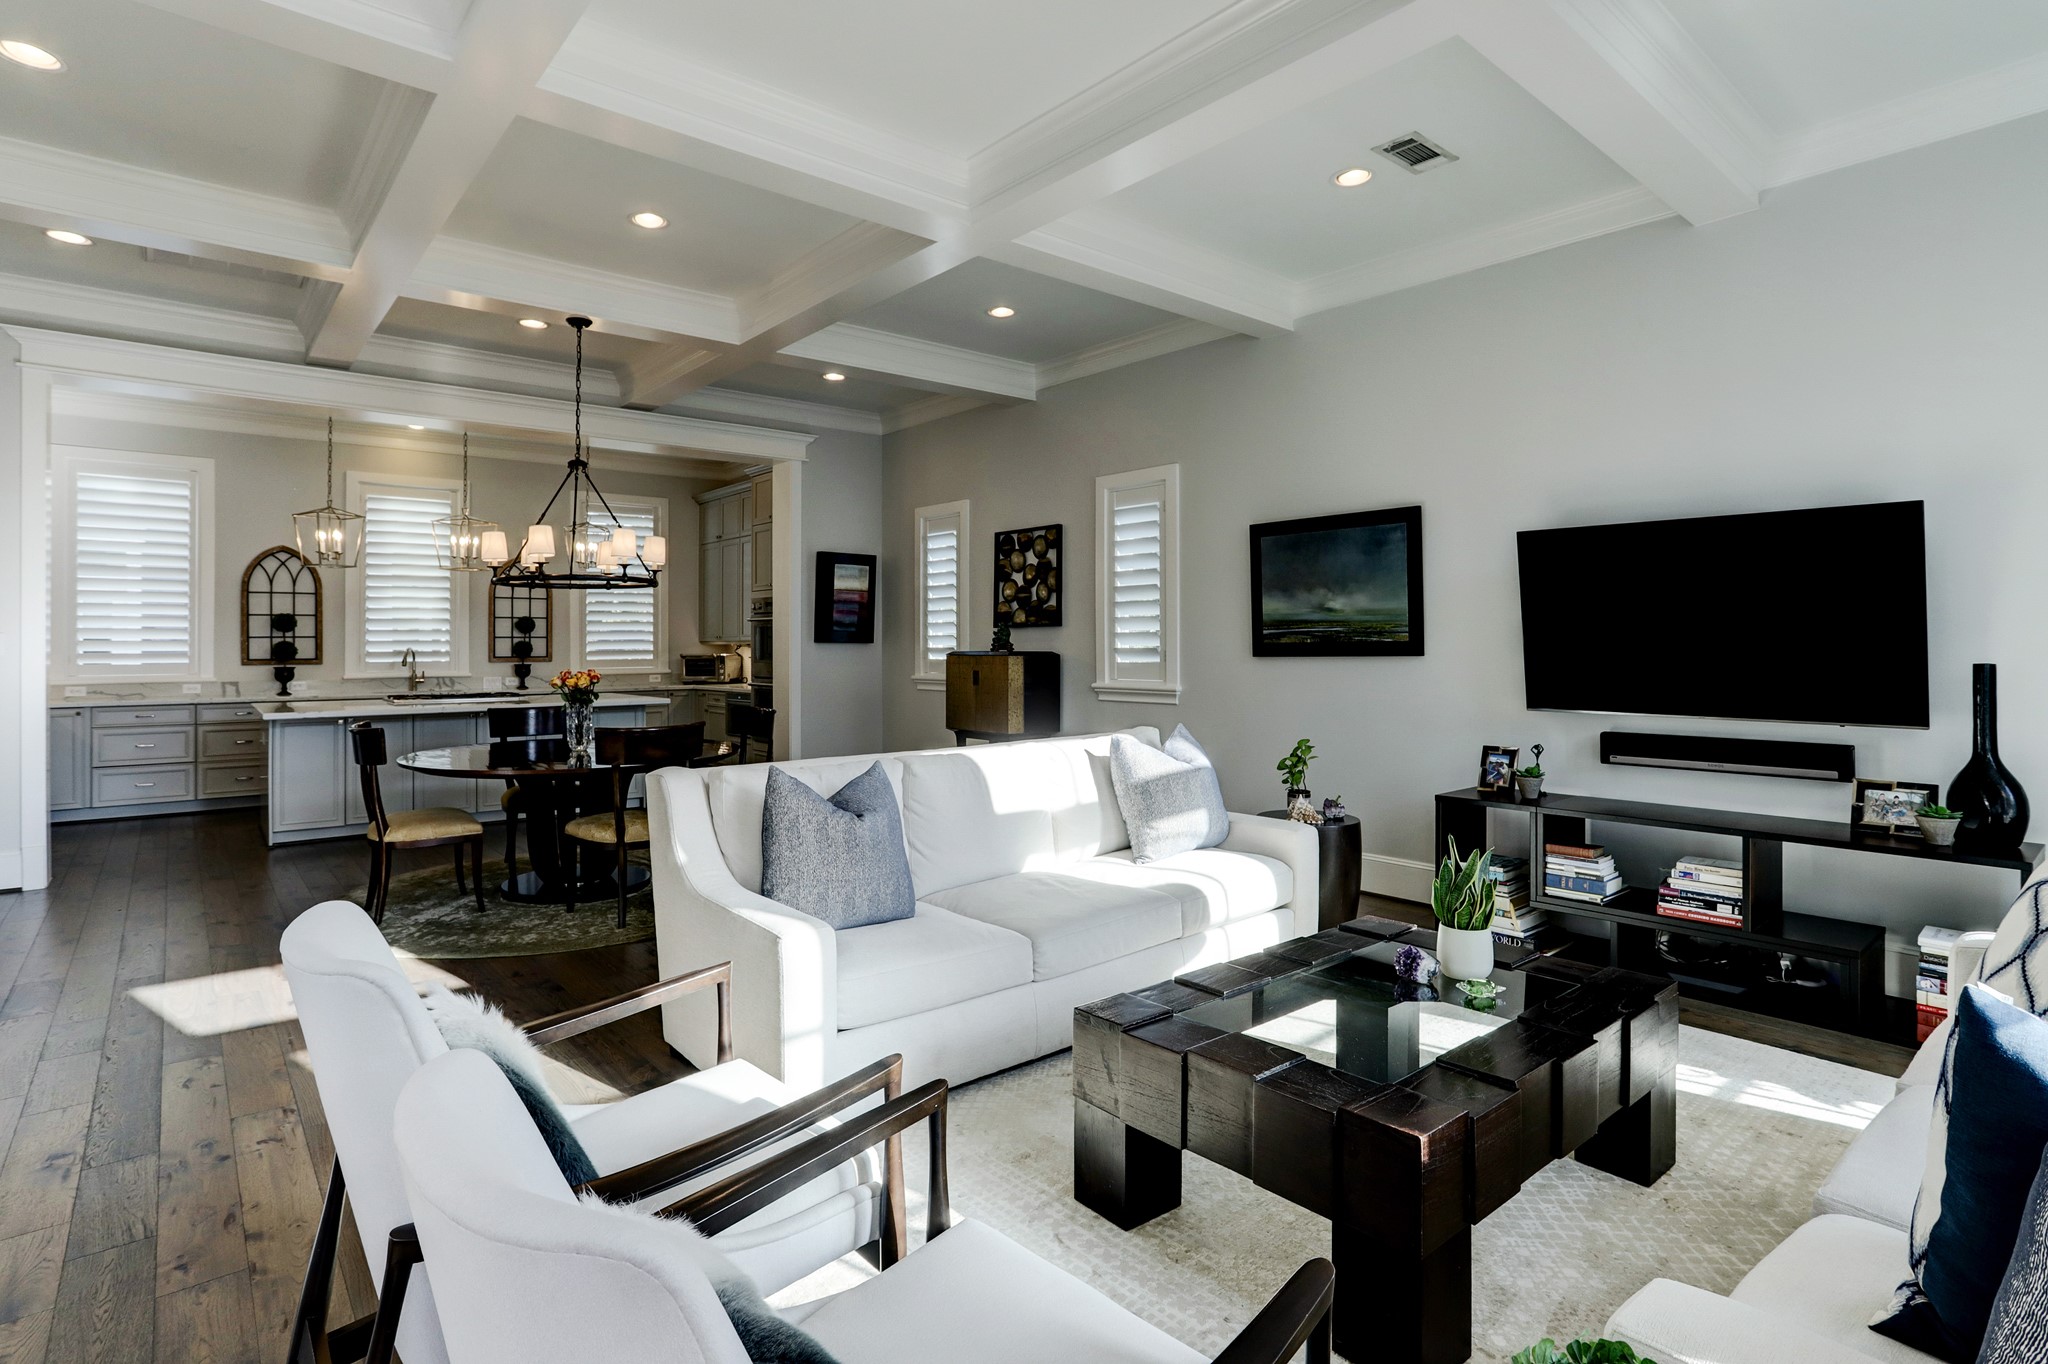 A view from the family room looking onto the open concept dining space and kitchen. It's hard to miss the beautiful ceiling details and extensive millwork around every door, window and entryway!